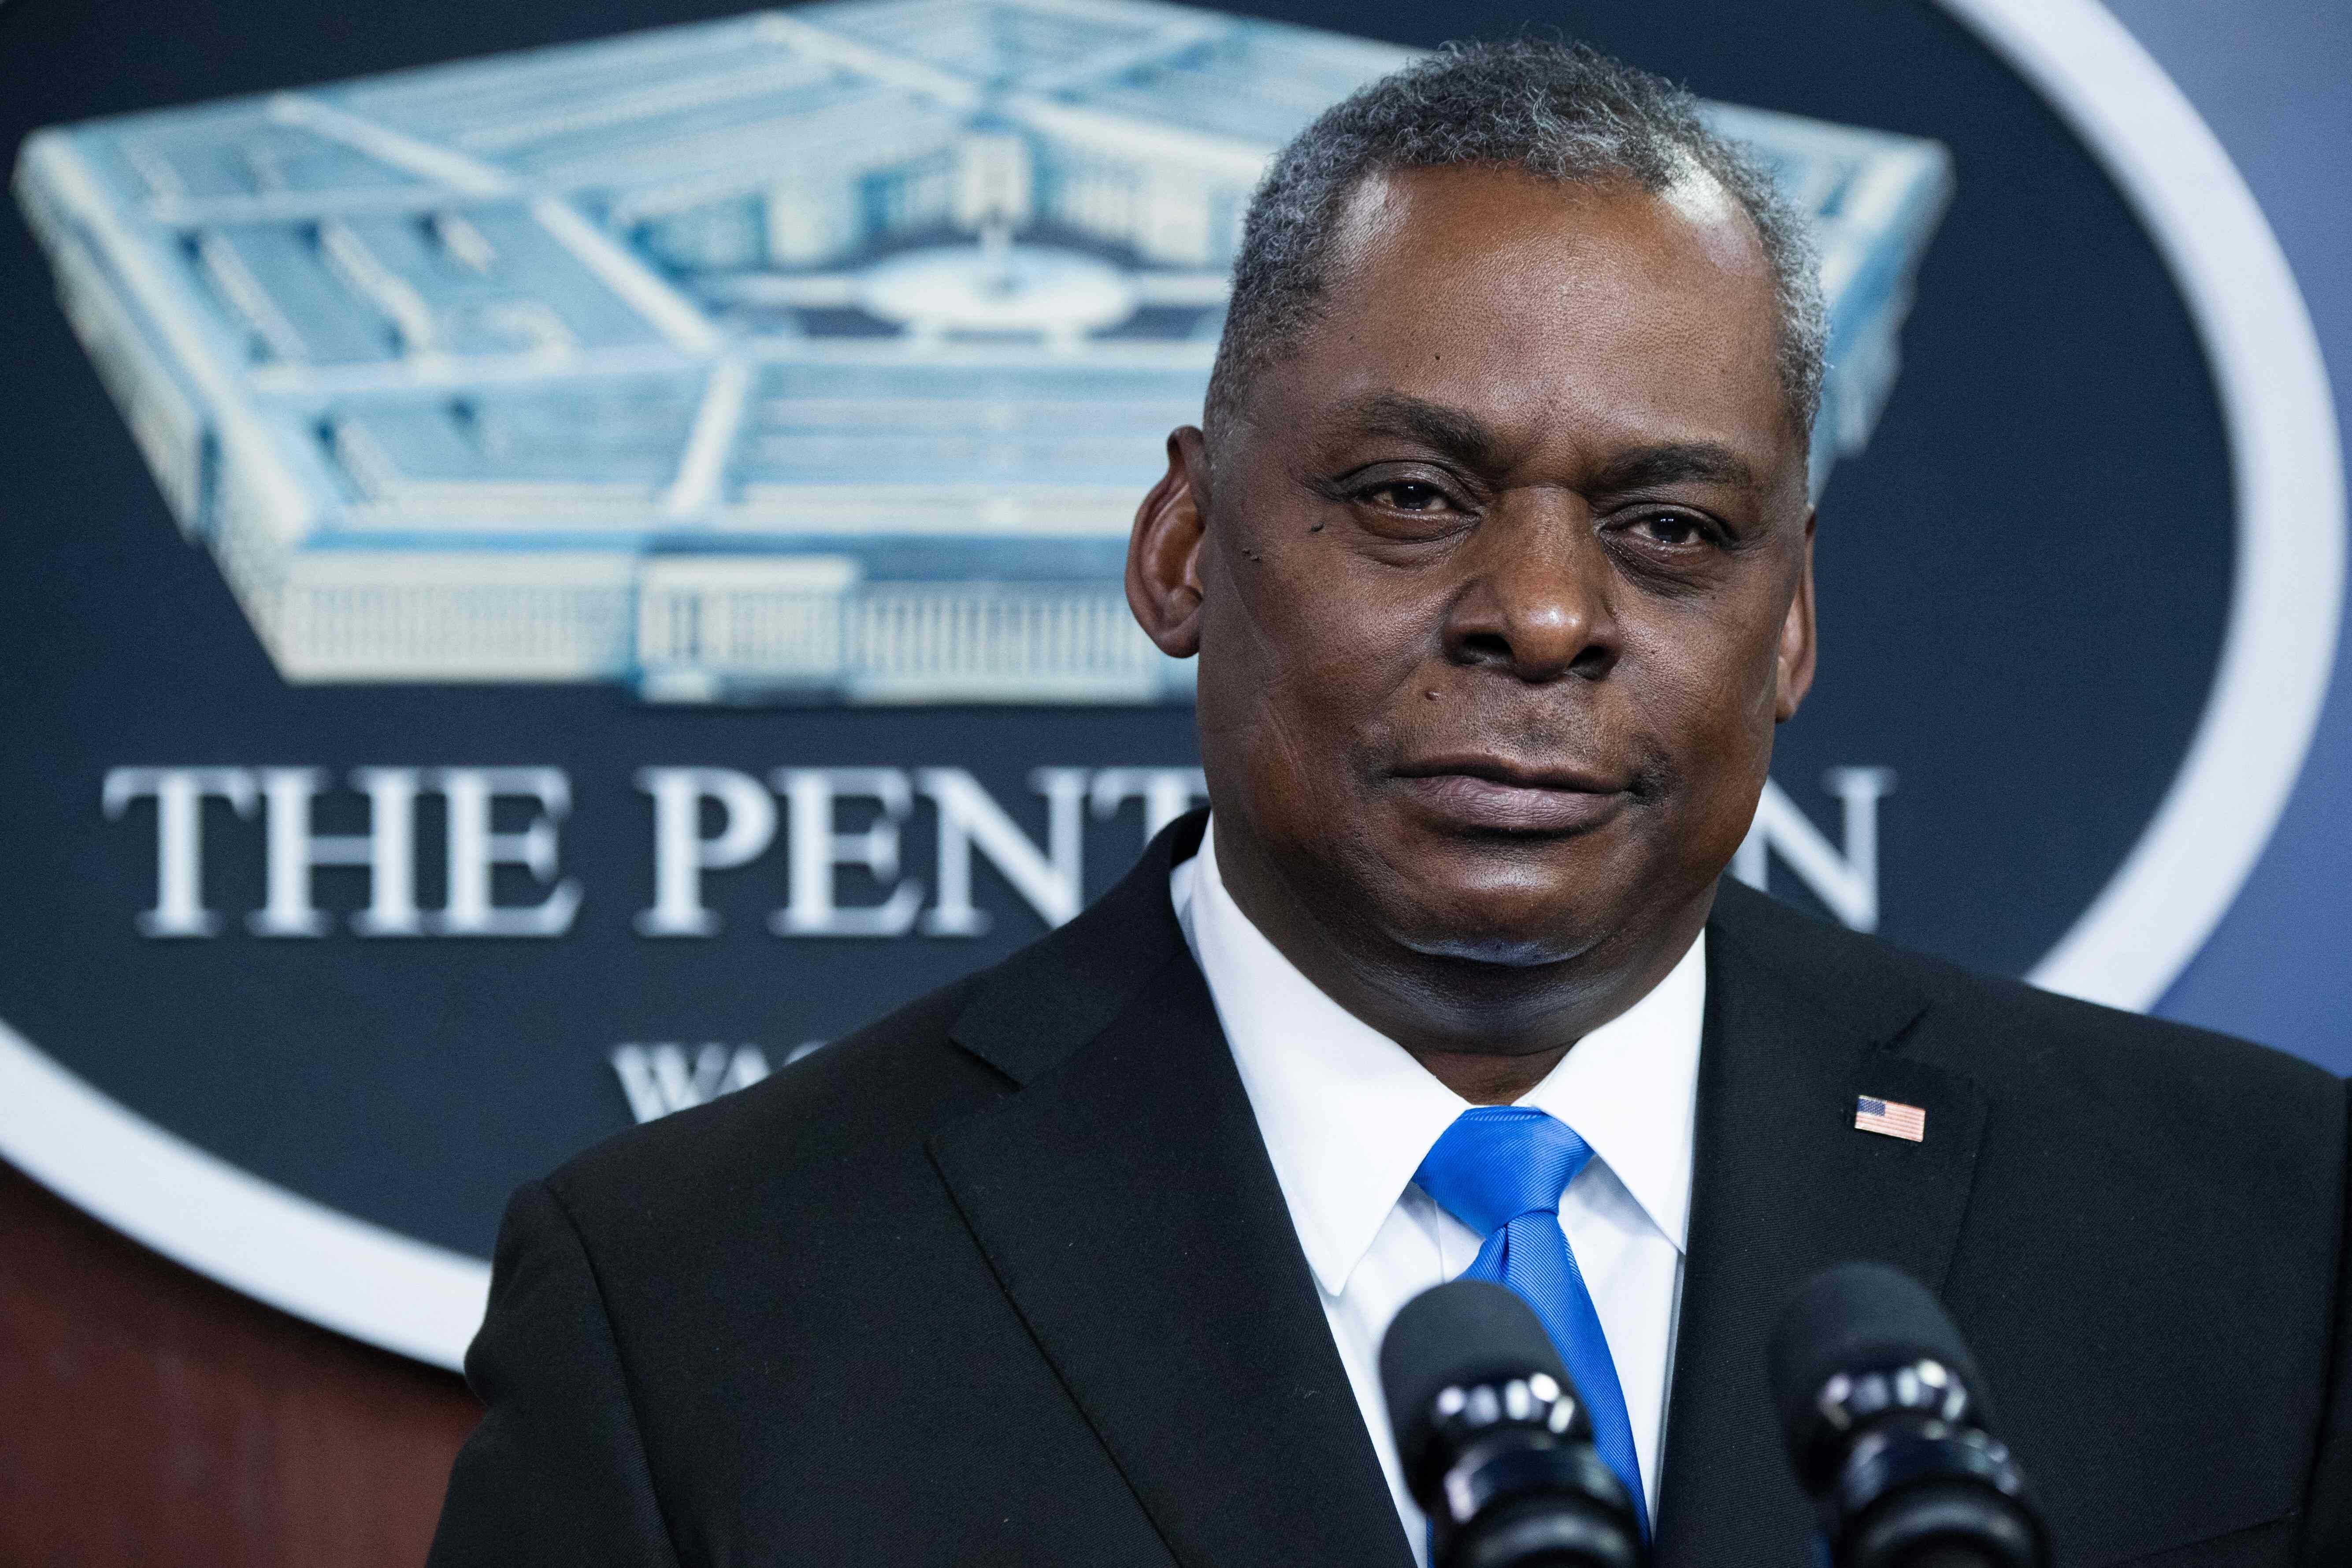 Defence Secretary Lloyd Austin last month said the US sought “constructive, stable” ties with China but would “not flinch” if its interests were threatened. Photo: AFP